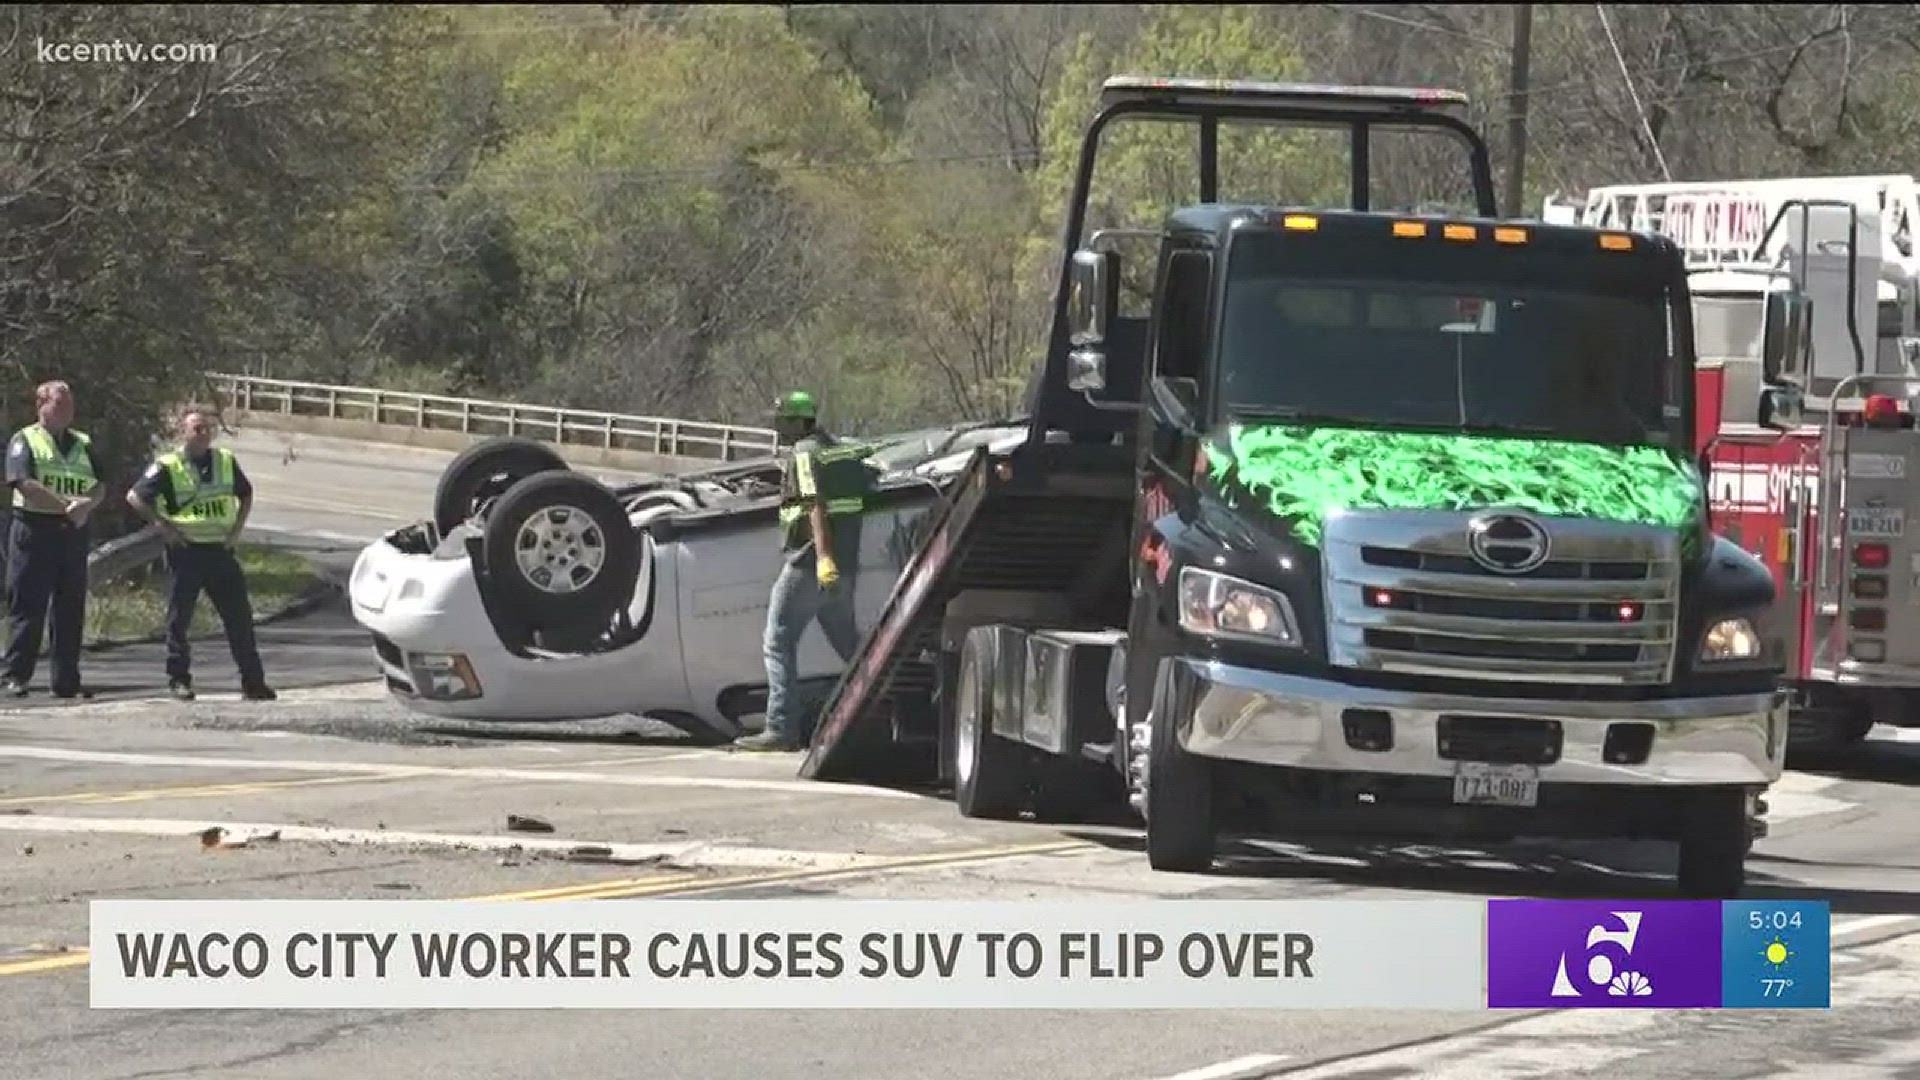 A Waco City worker was written up after allegedly causing an SUV to flip over.